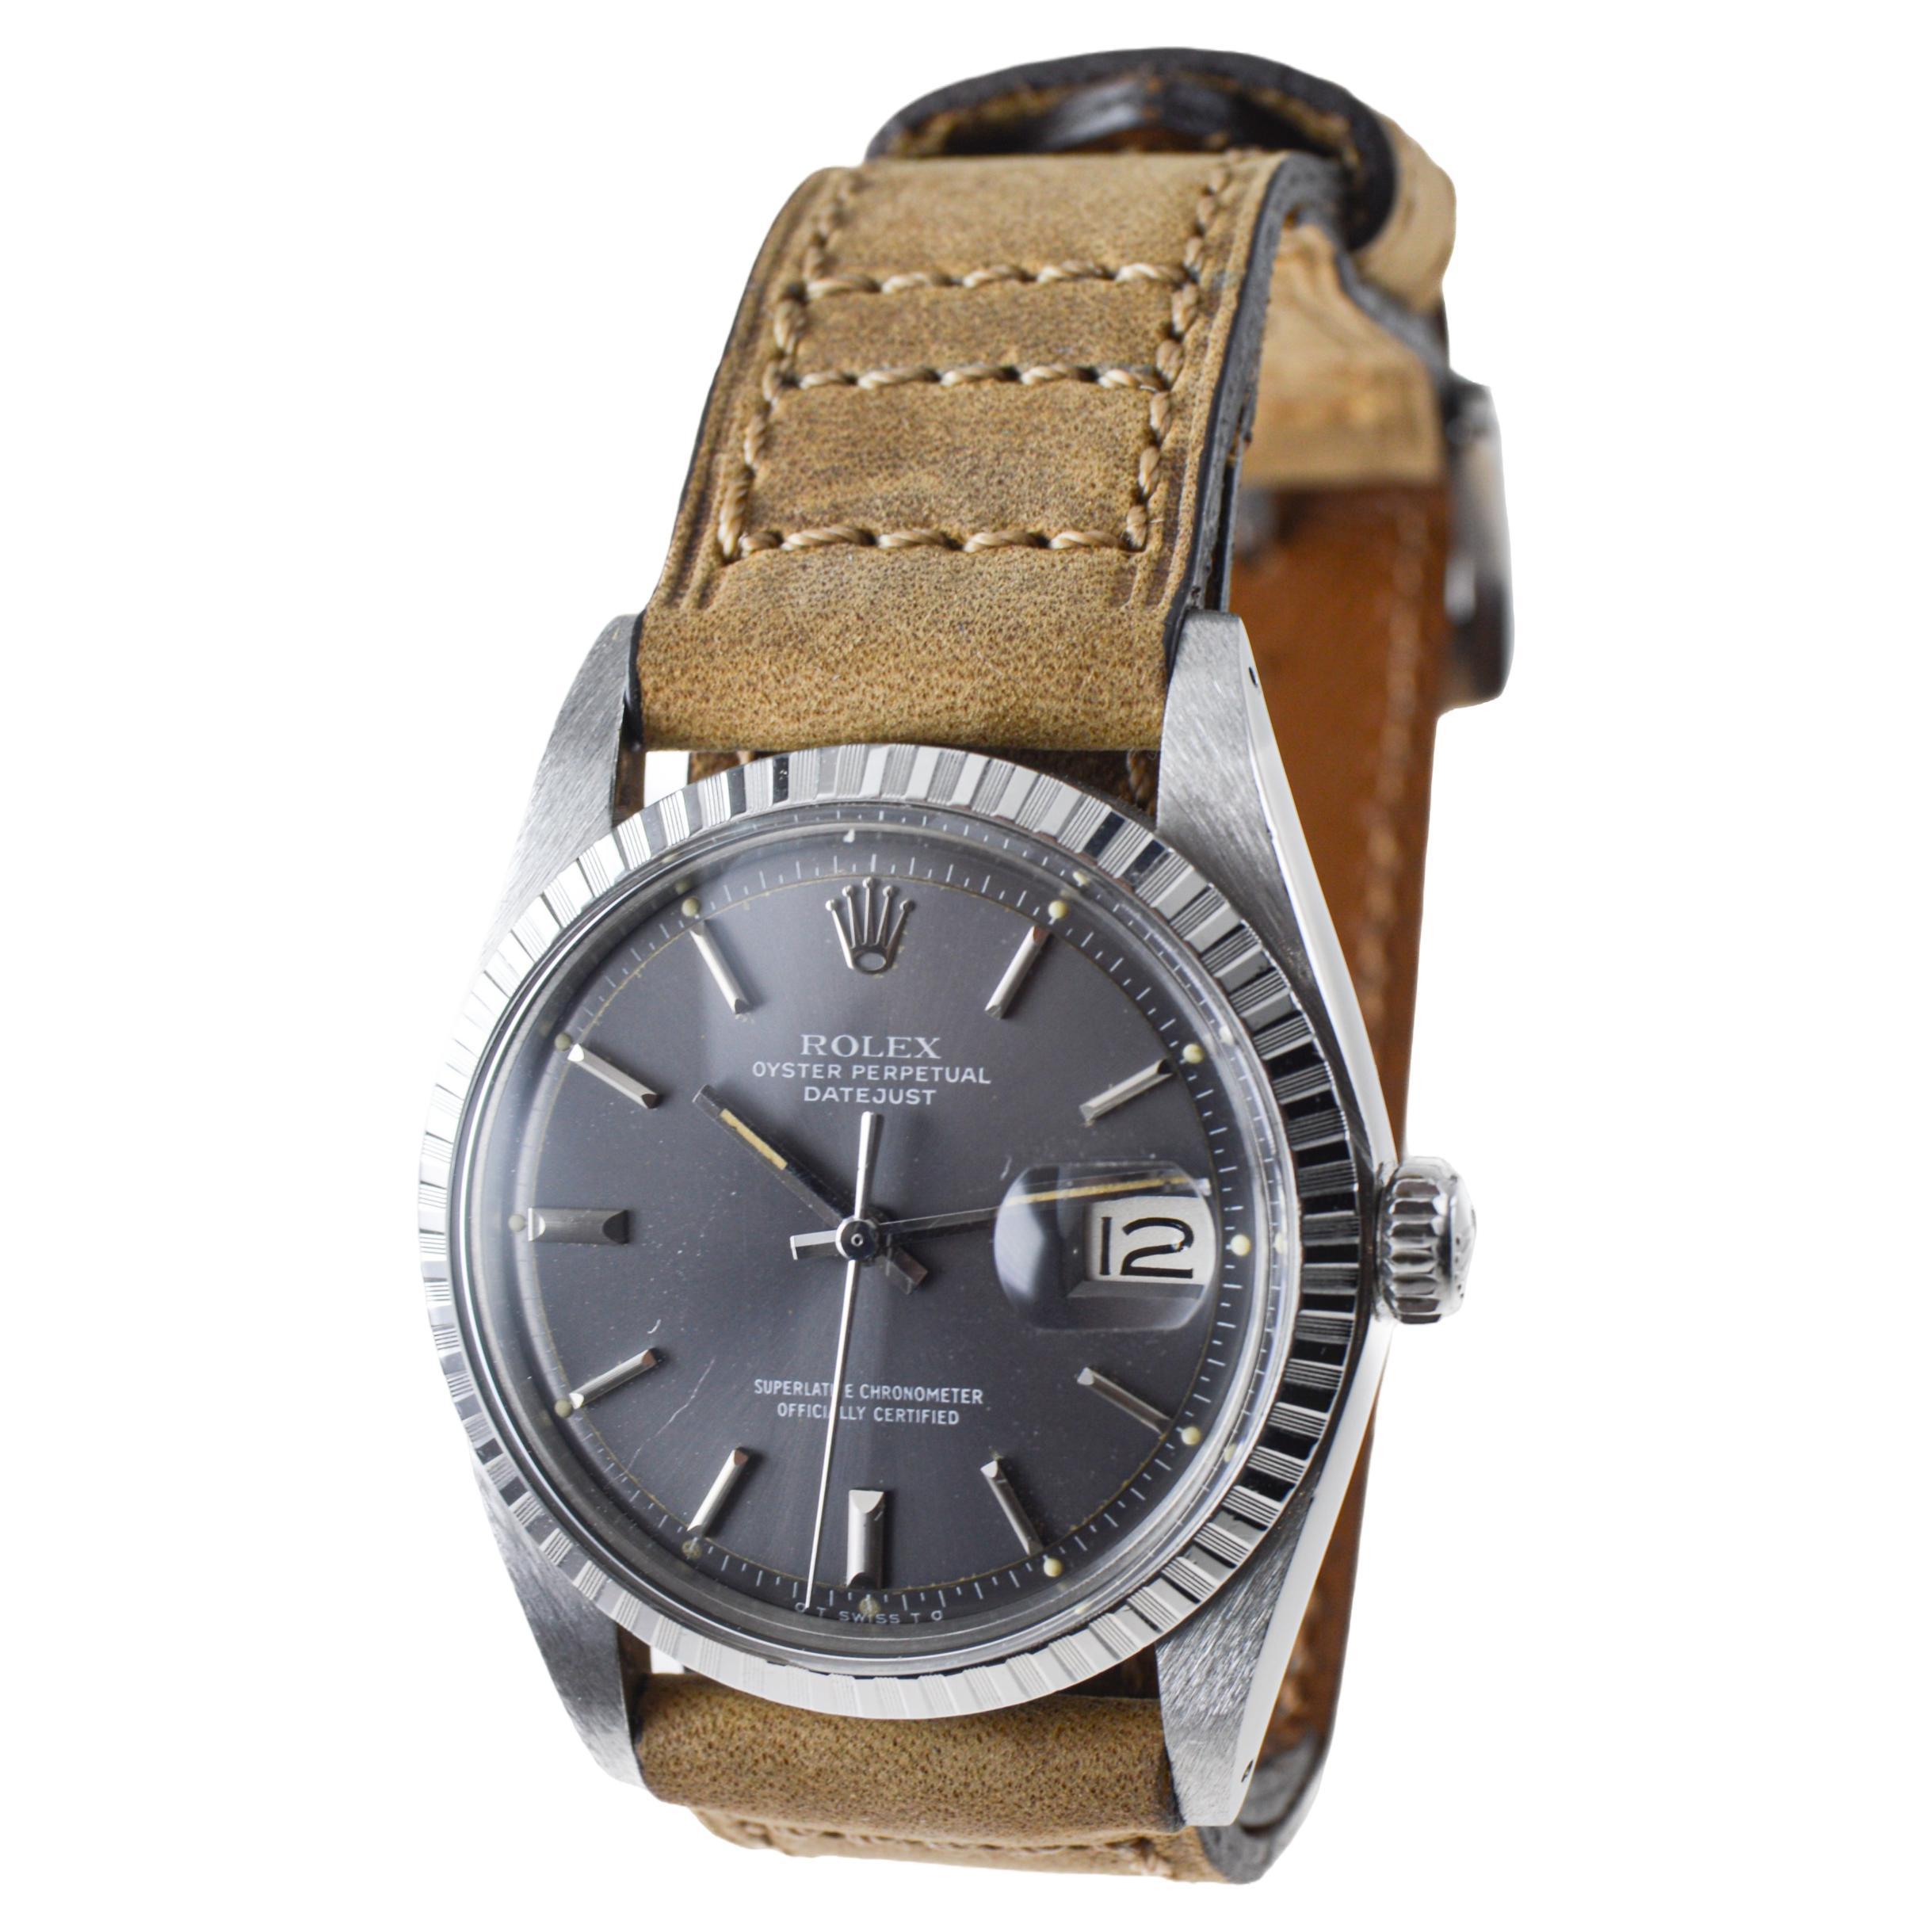 Rolex Steel Datejust with Rare Original Charcoal Dial from, 1960's For Sale 1